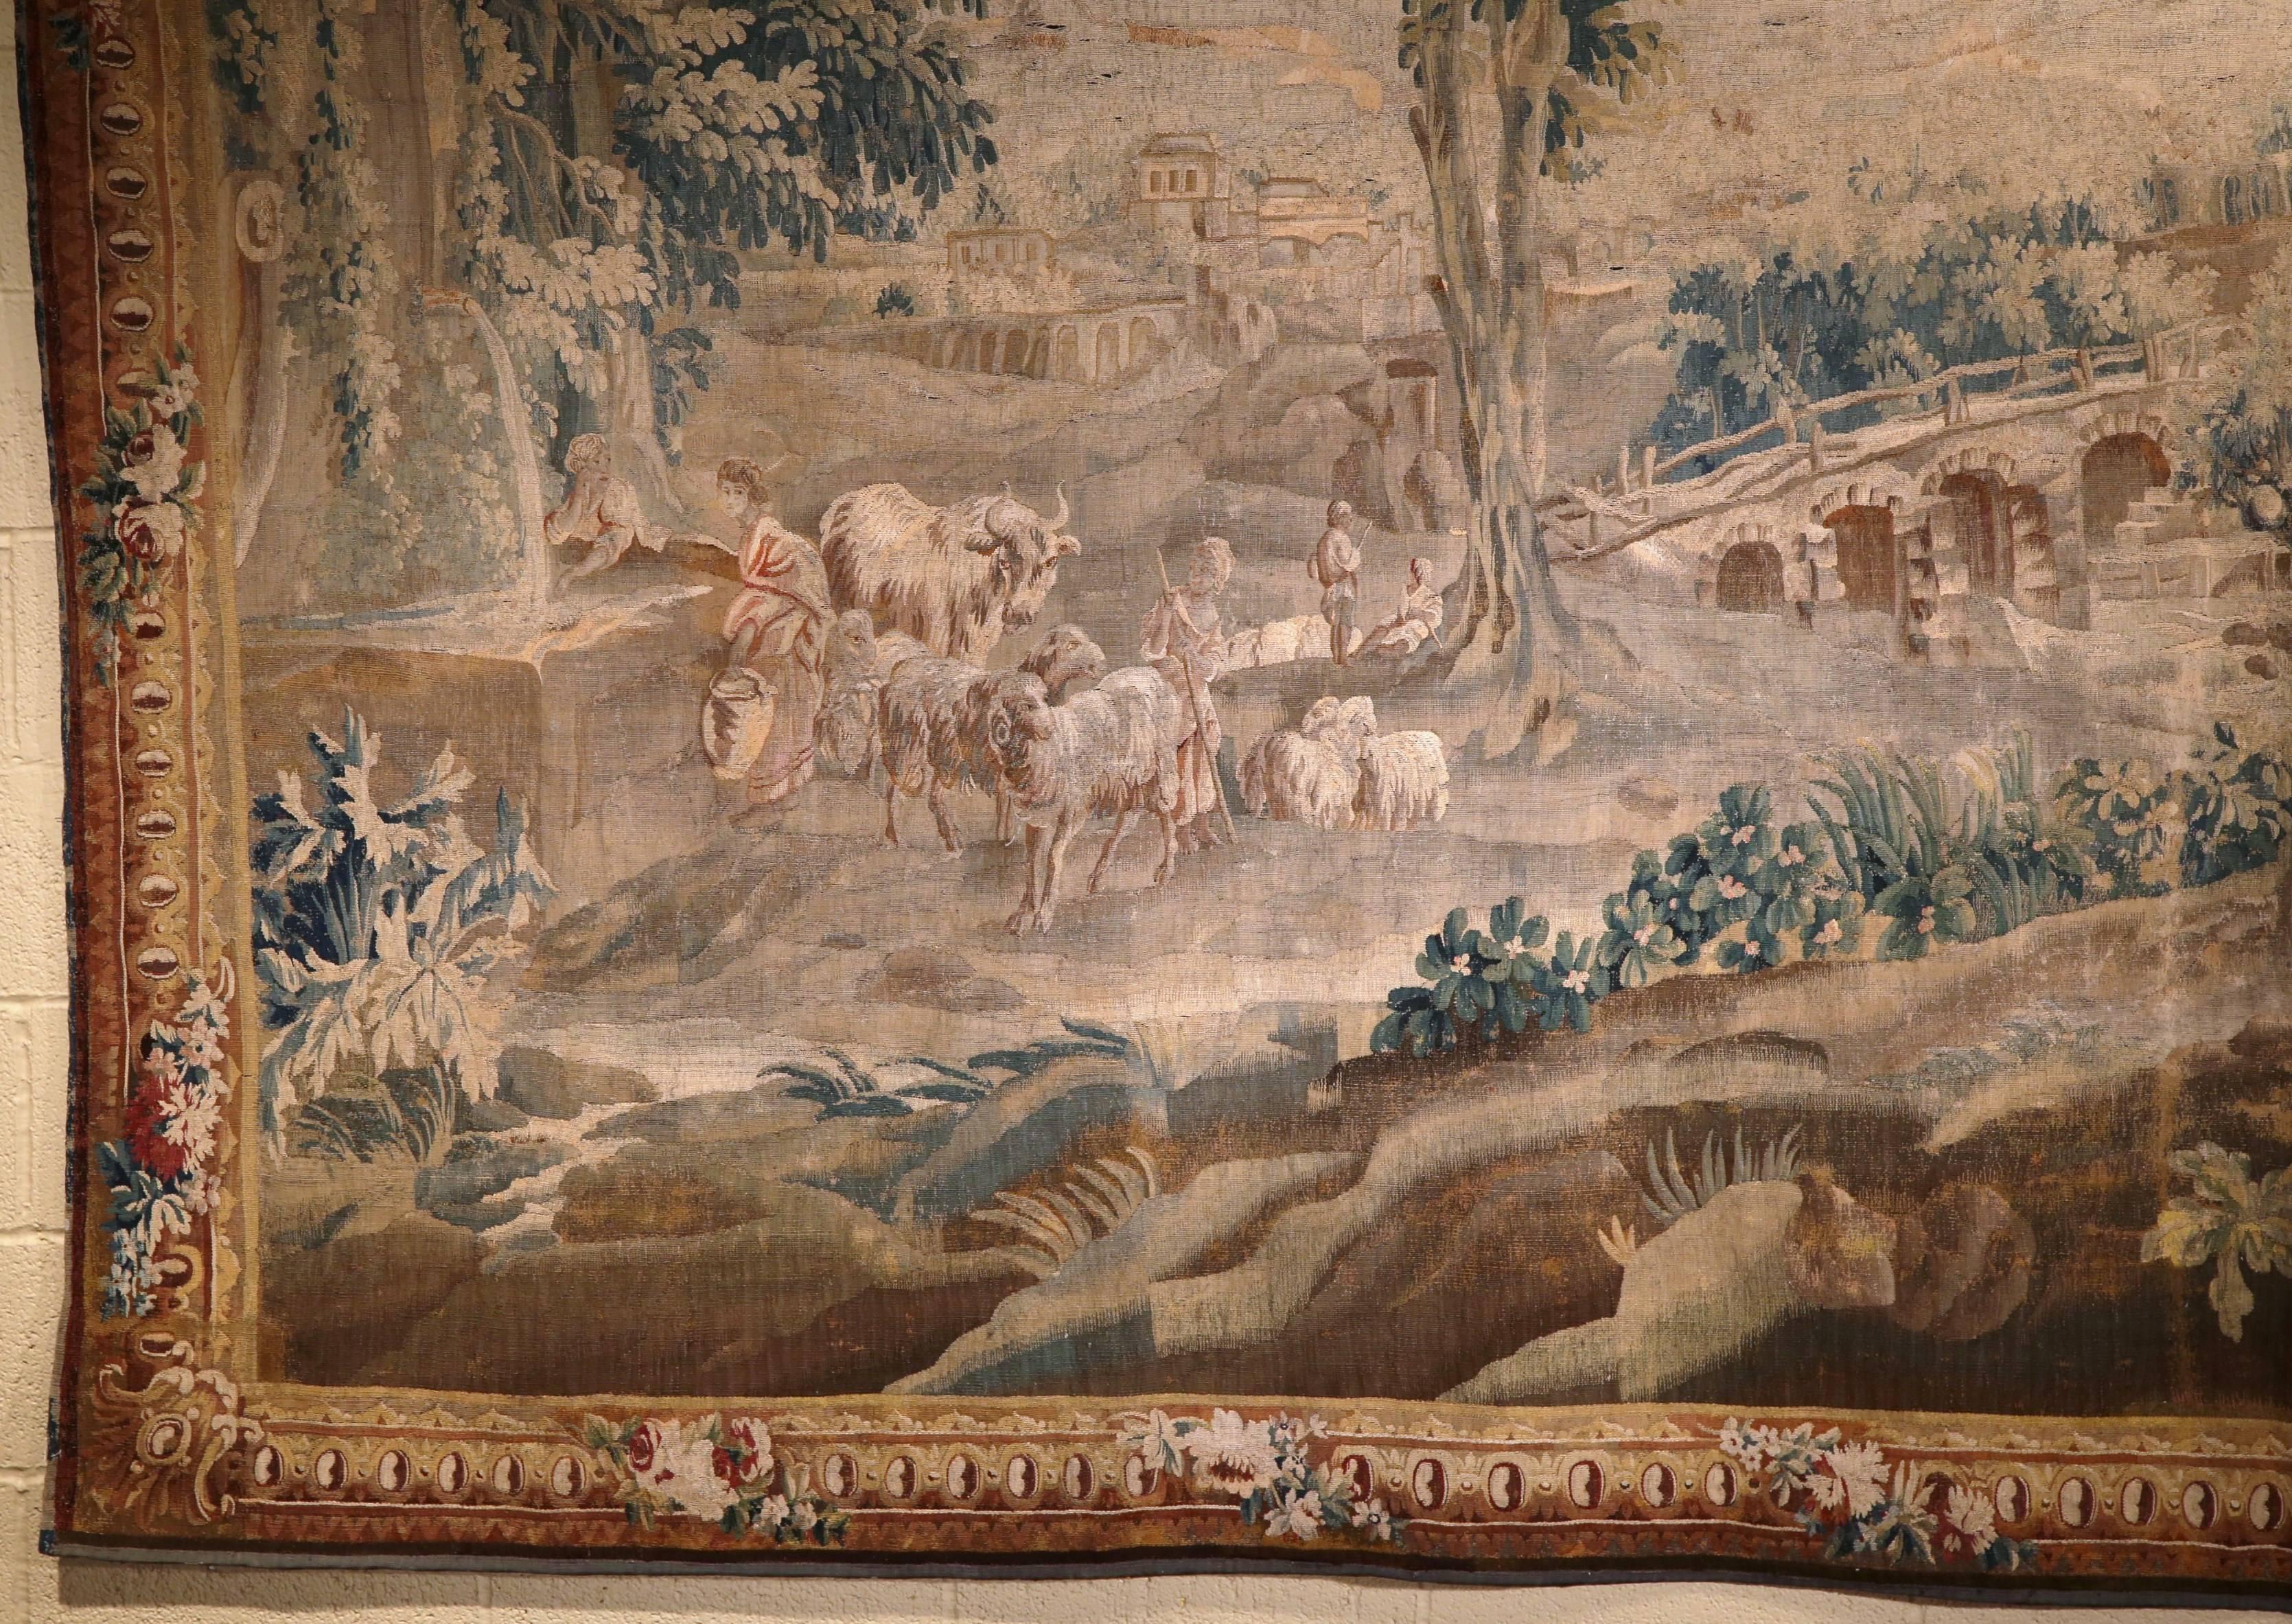 Make a statement in your home with this antique Aubusson tapestry from France, circa 1740. In the style of Boucher, this piece depicts a pastoral scene with a shepherd, sheep, a chateau and bridge in the background, and a trio of amorous courtly